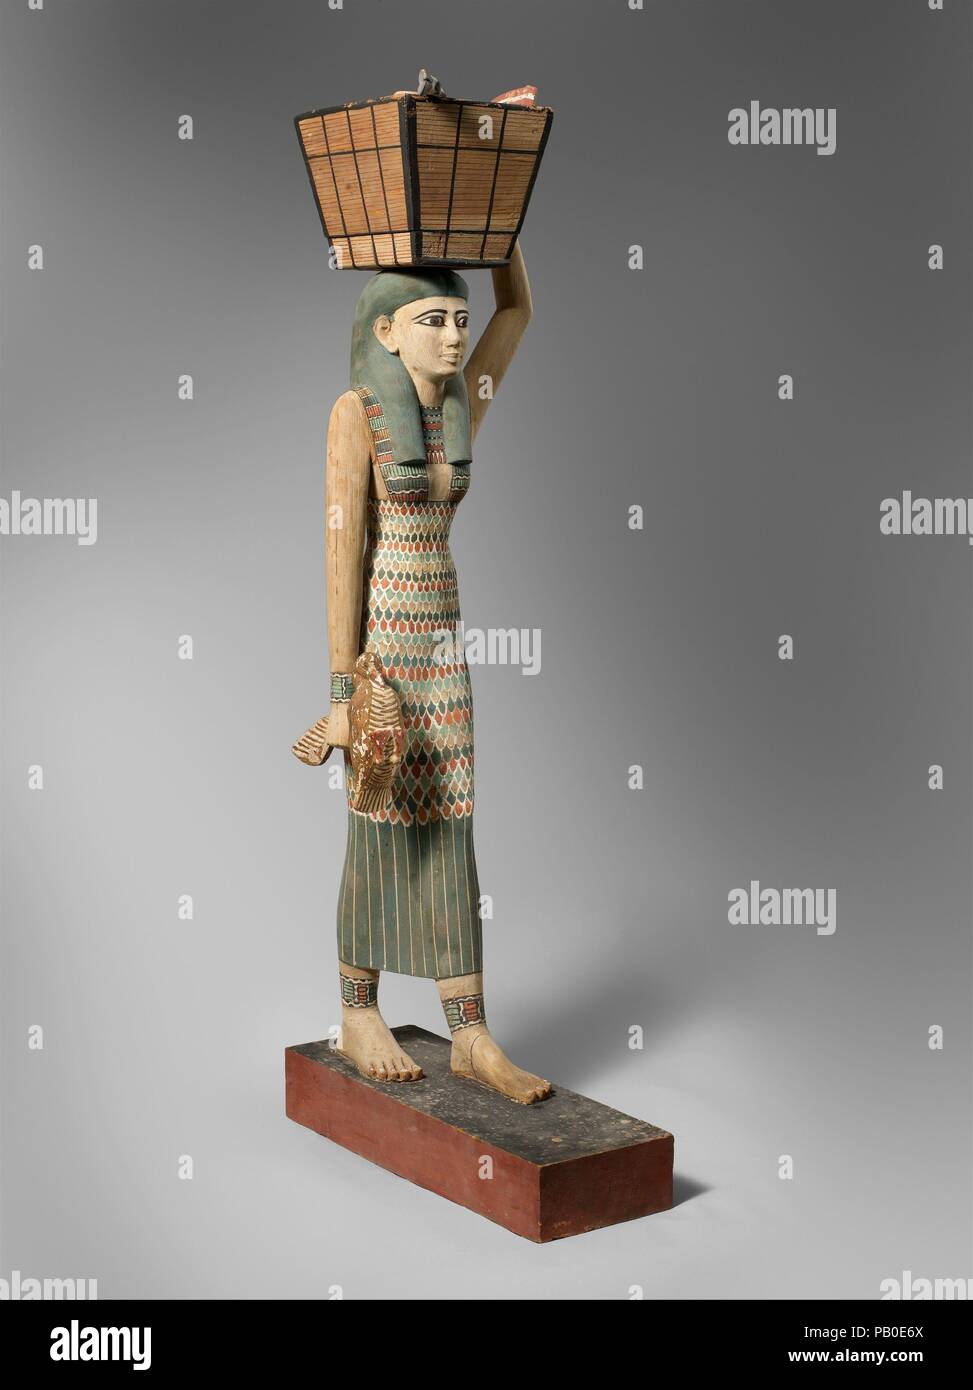 Estate Figure. Dimensions: H. 112 cm (44 1/8 in.); W. 17 cm (6 11/16 in.); D. 46.7 cm (18 3/8 in.). Dynasty: Dynasty 12. Reign: early reign of Amenemhat I. Date: ca. 1981-1975 B.C..  This masterpiece of Egyptian wood carving was discovered in a hidden chamber at the side of the passage leading into the rock cut tomb of the royal chief steward Meketre, who began his career under King Nebhepetre Mentuhotep II of Dynasty 11 and continued to serve successive kings into the early years of Dynasty 12. Together with a second, very similar female figure (now in the Egyptian Museum, Cairo) this statue  Stock Photo